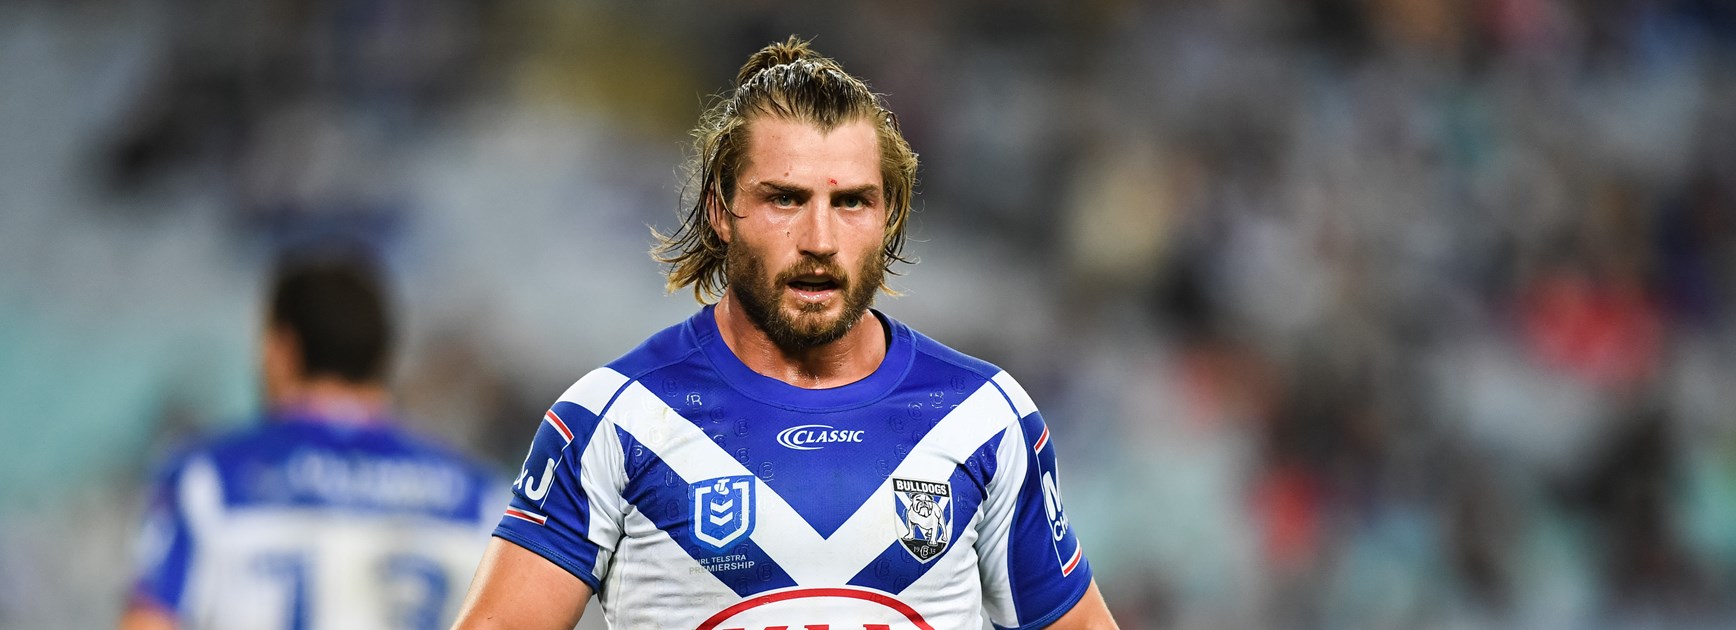 Round 14 Bulldogs v Roosters Breakdown